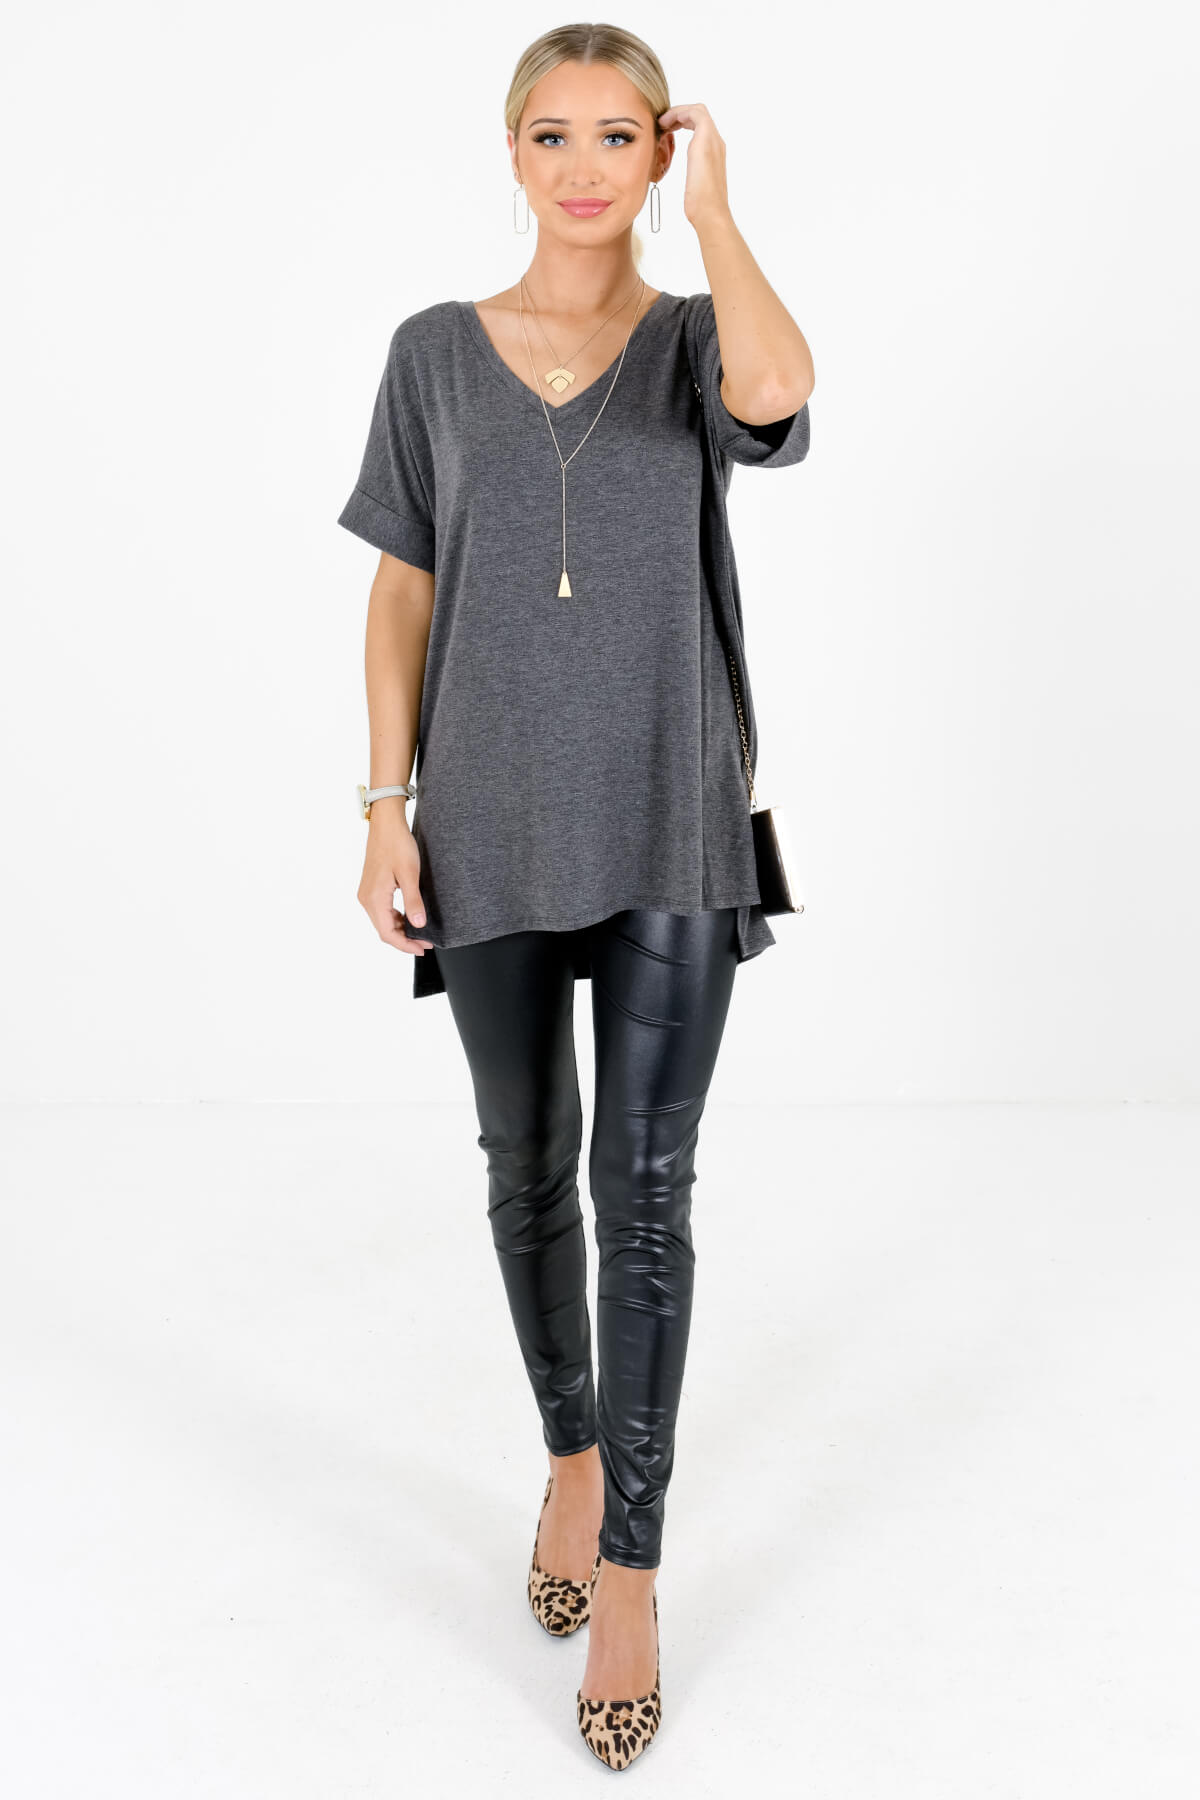 Women’s Charcoal Gray Fall and Winter Boutique Clothing